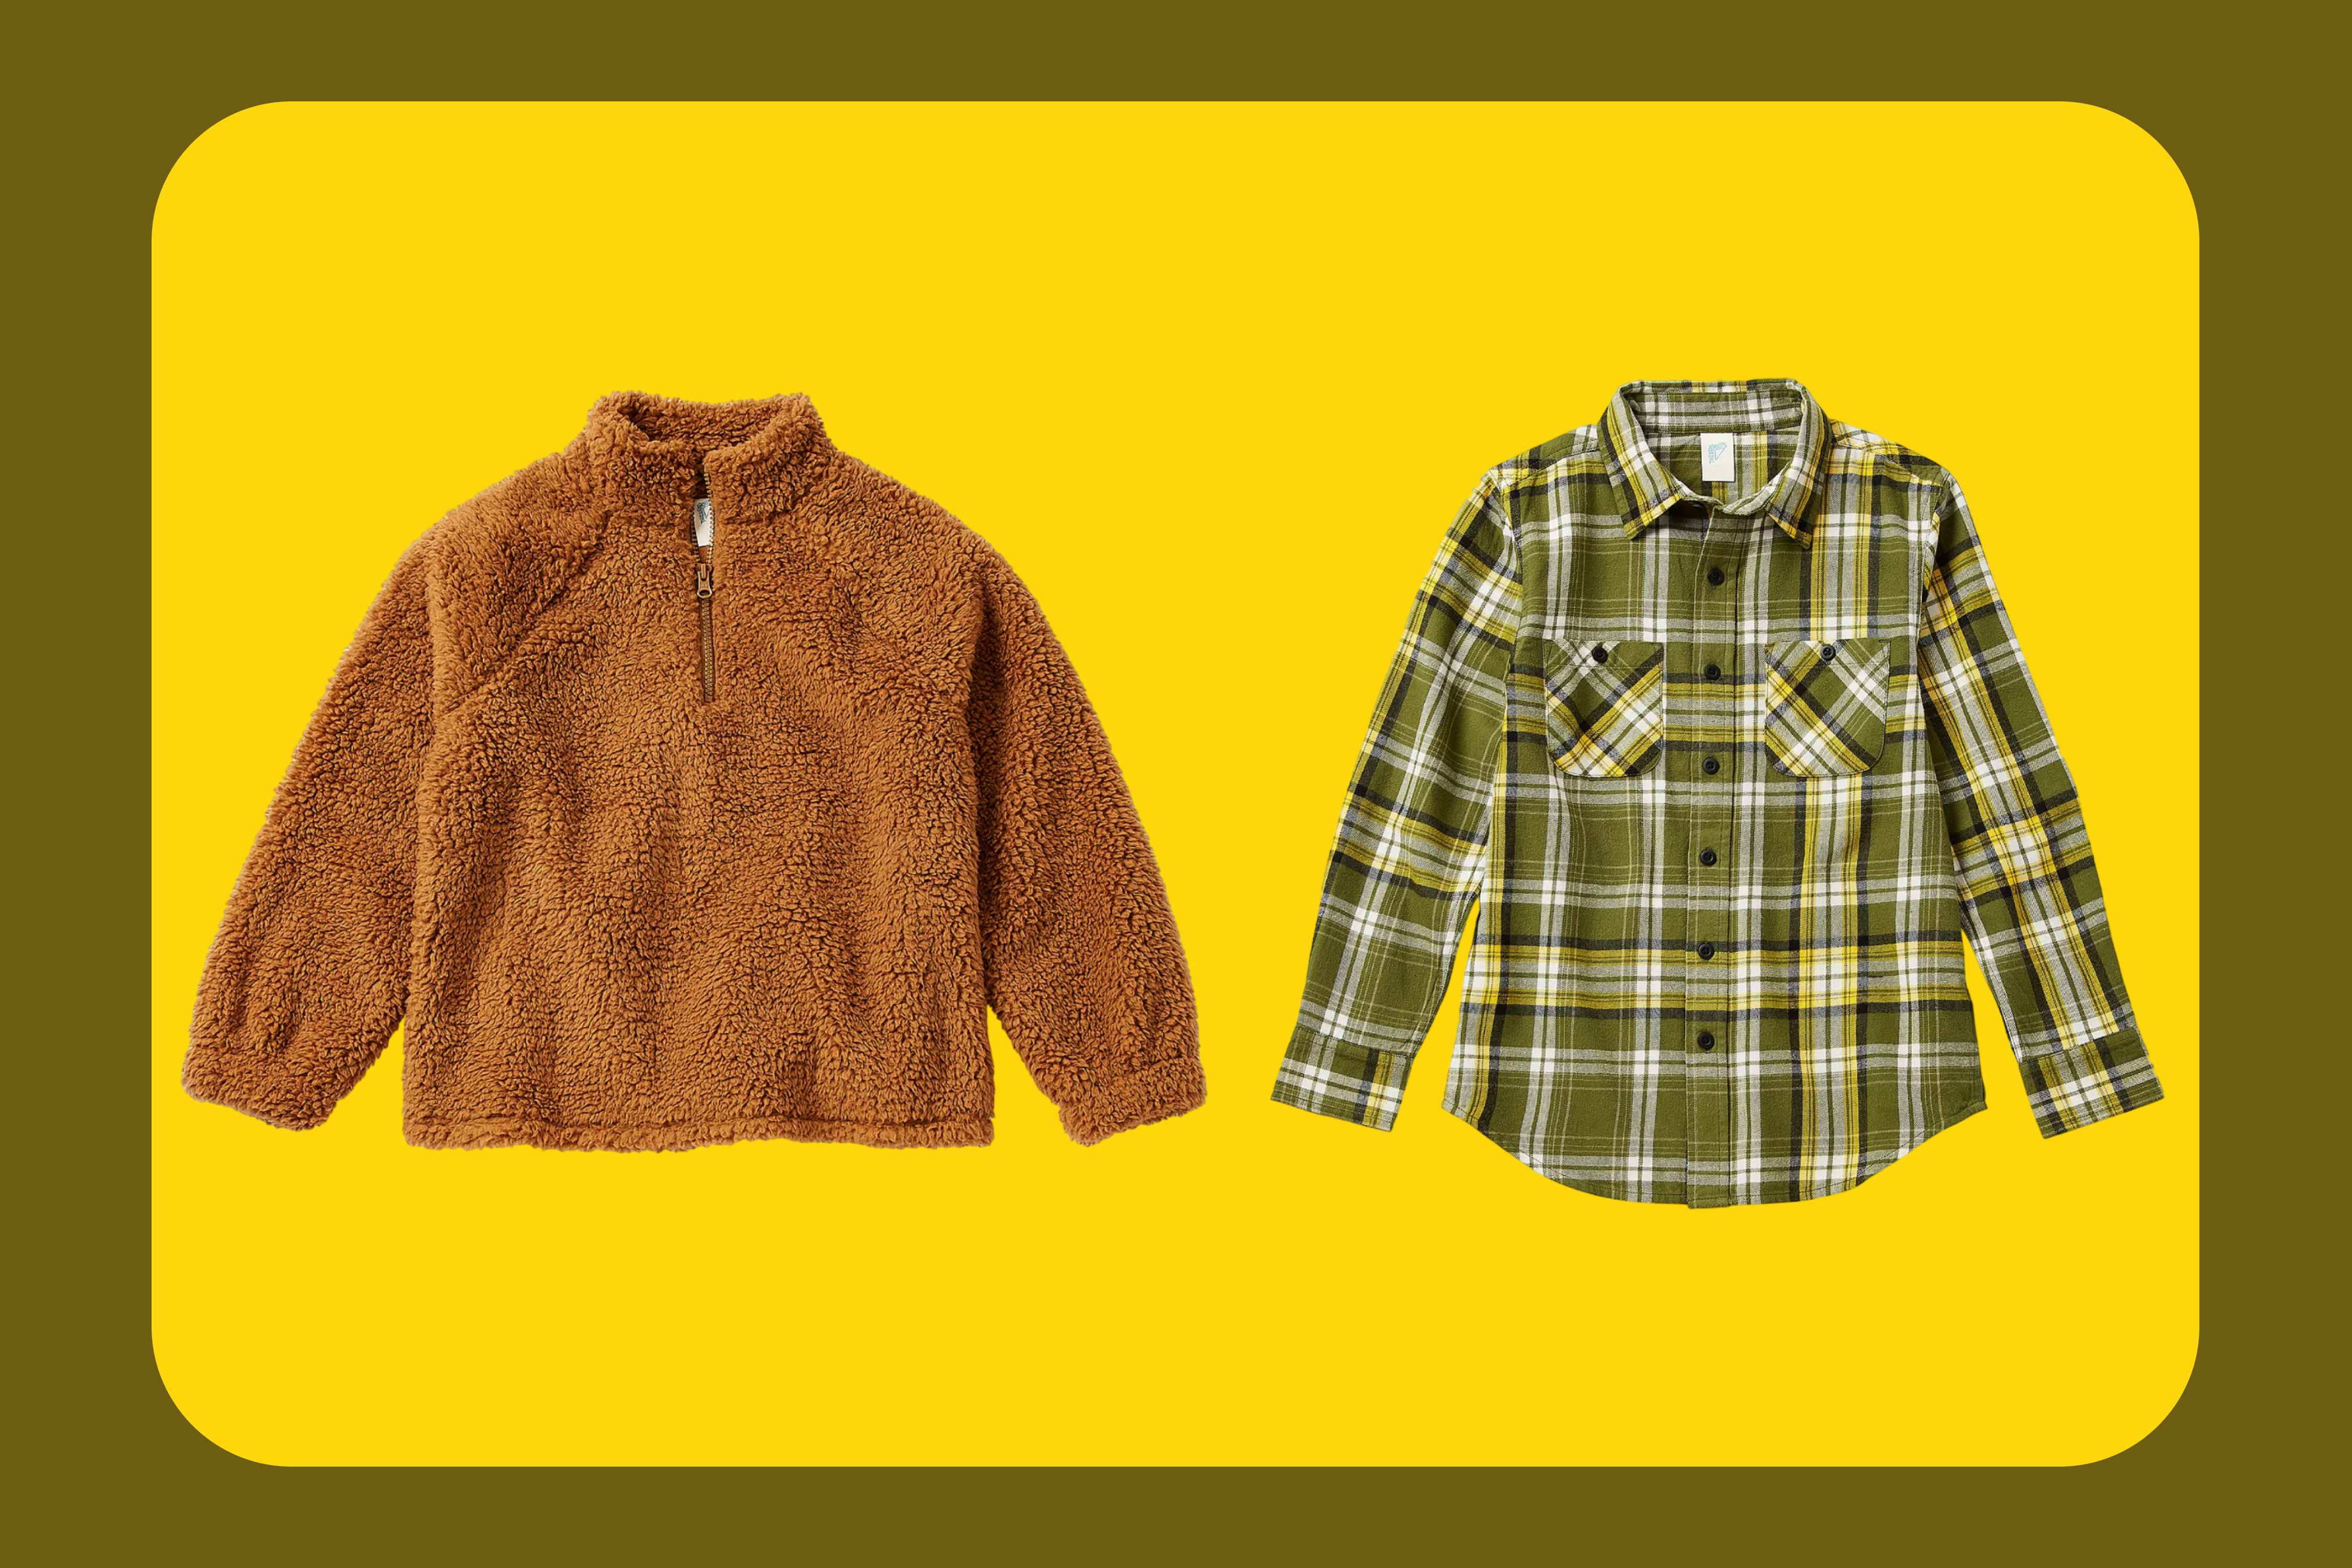 JCPenney Kids' Apparel Clearance: $5 Jumper, $6 Pullover, and More